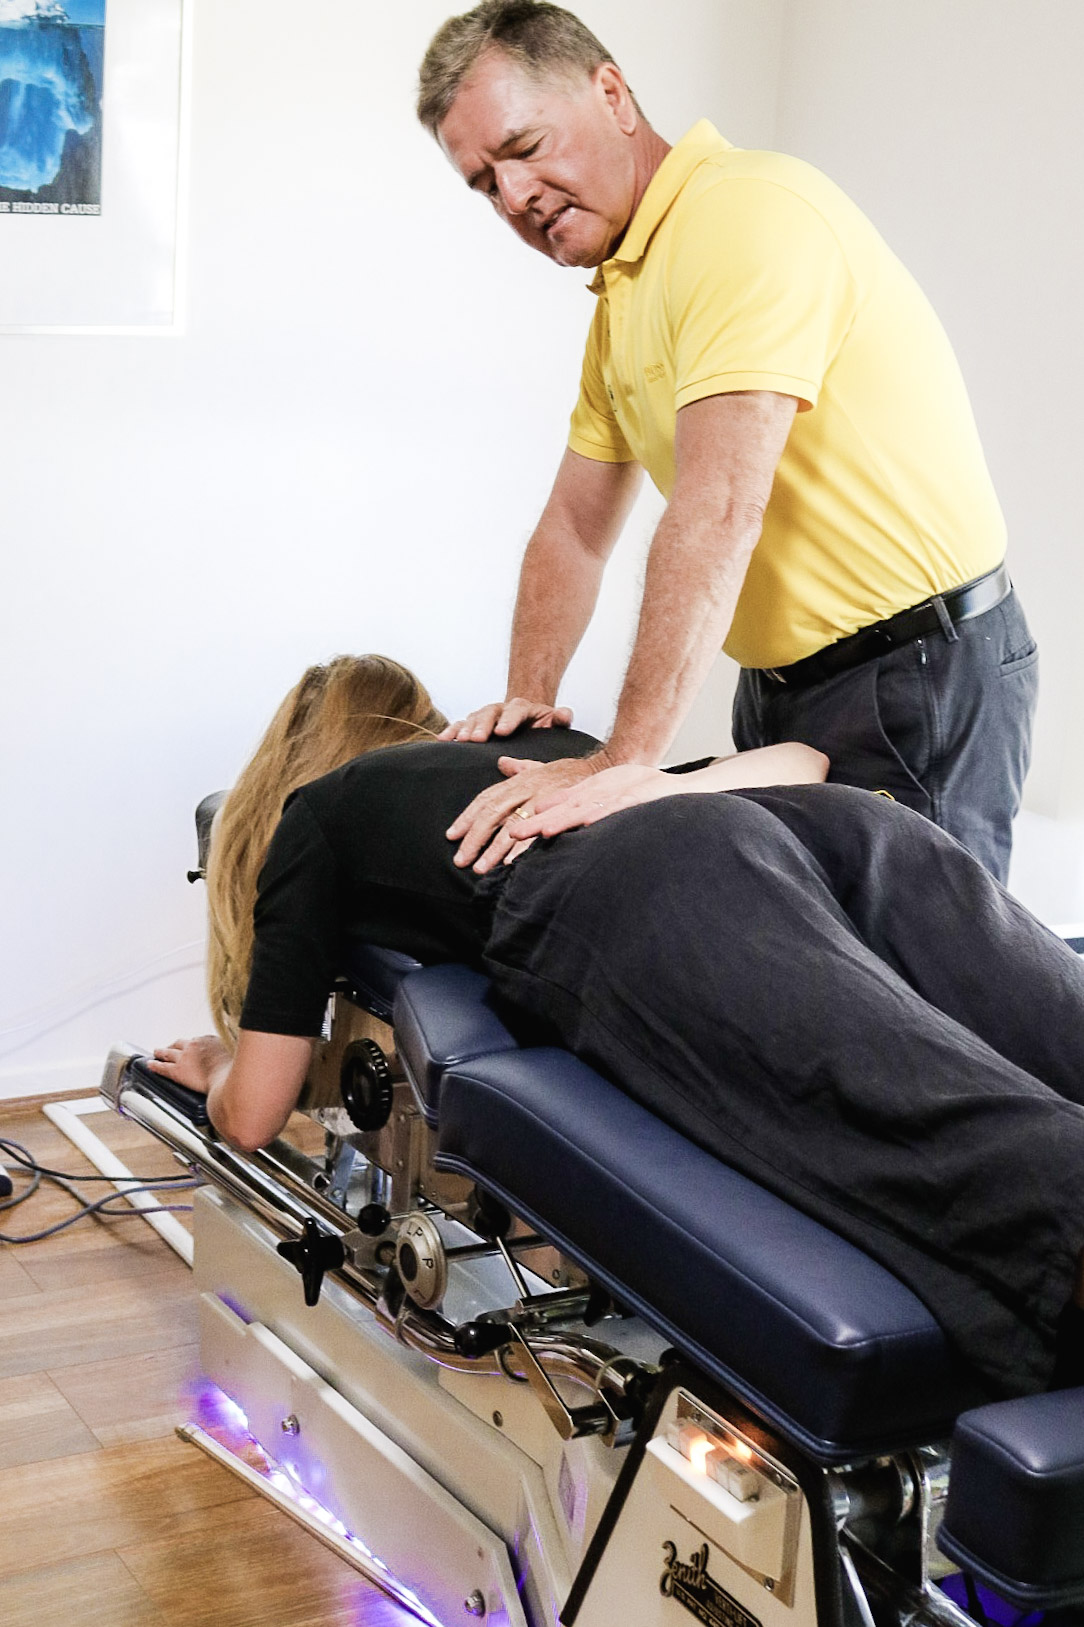 Contact Spine Paradise - Chiropractor Miami, Burleigh Heads and Varsity Lakes, Gold Coast